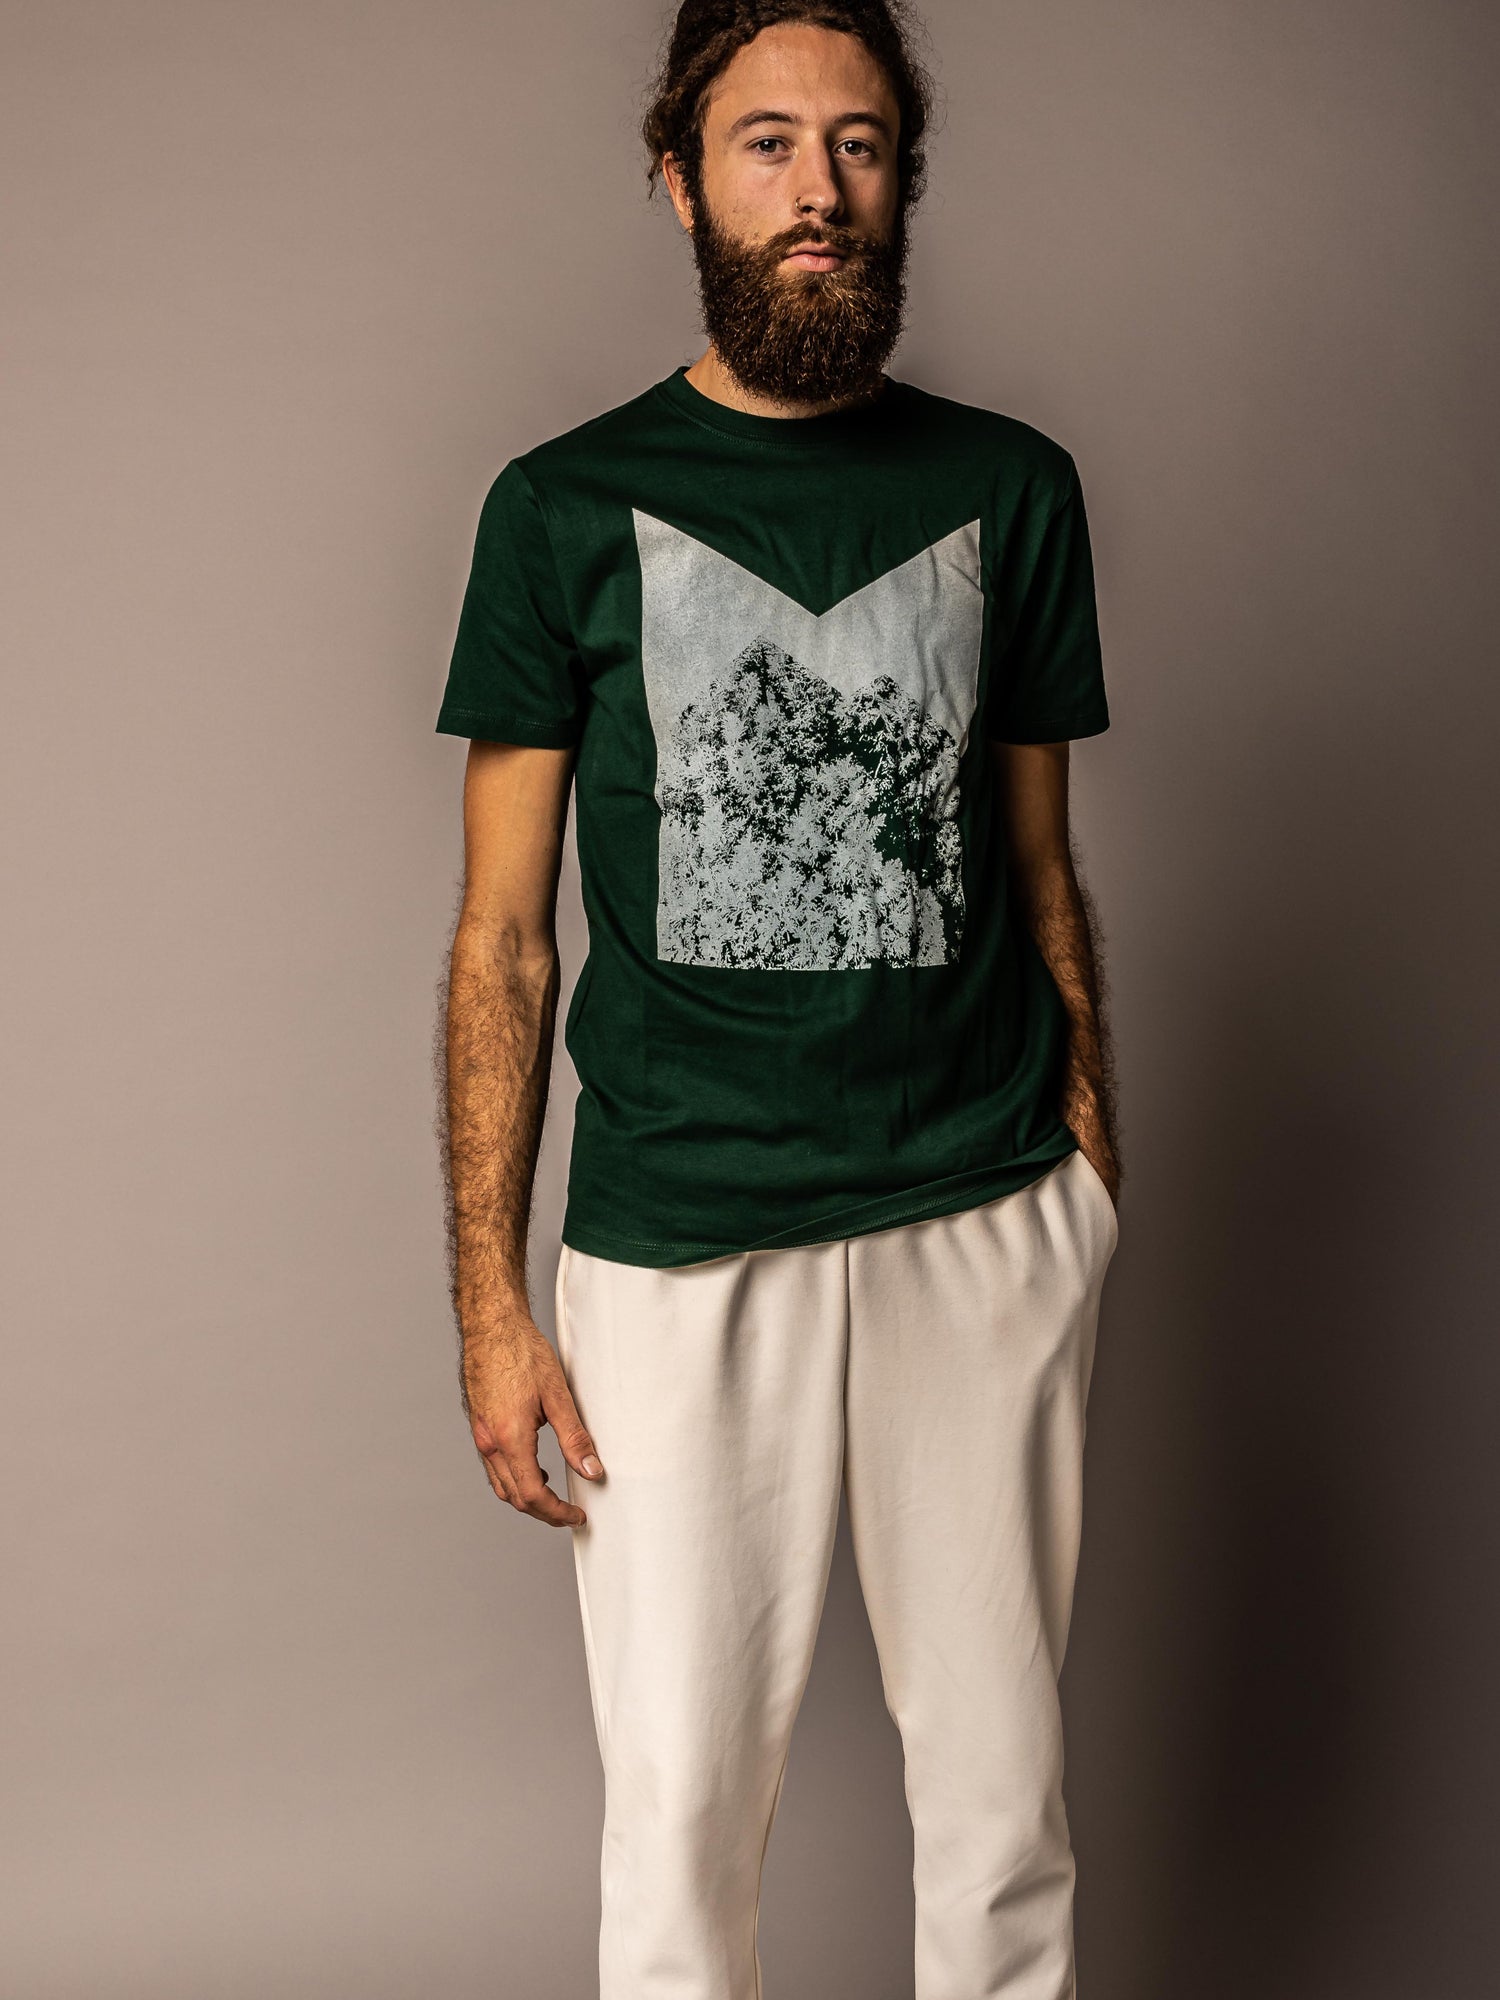 Green men's t-shirt with pattern